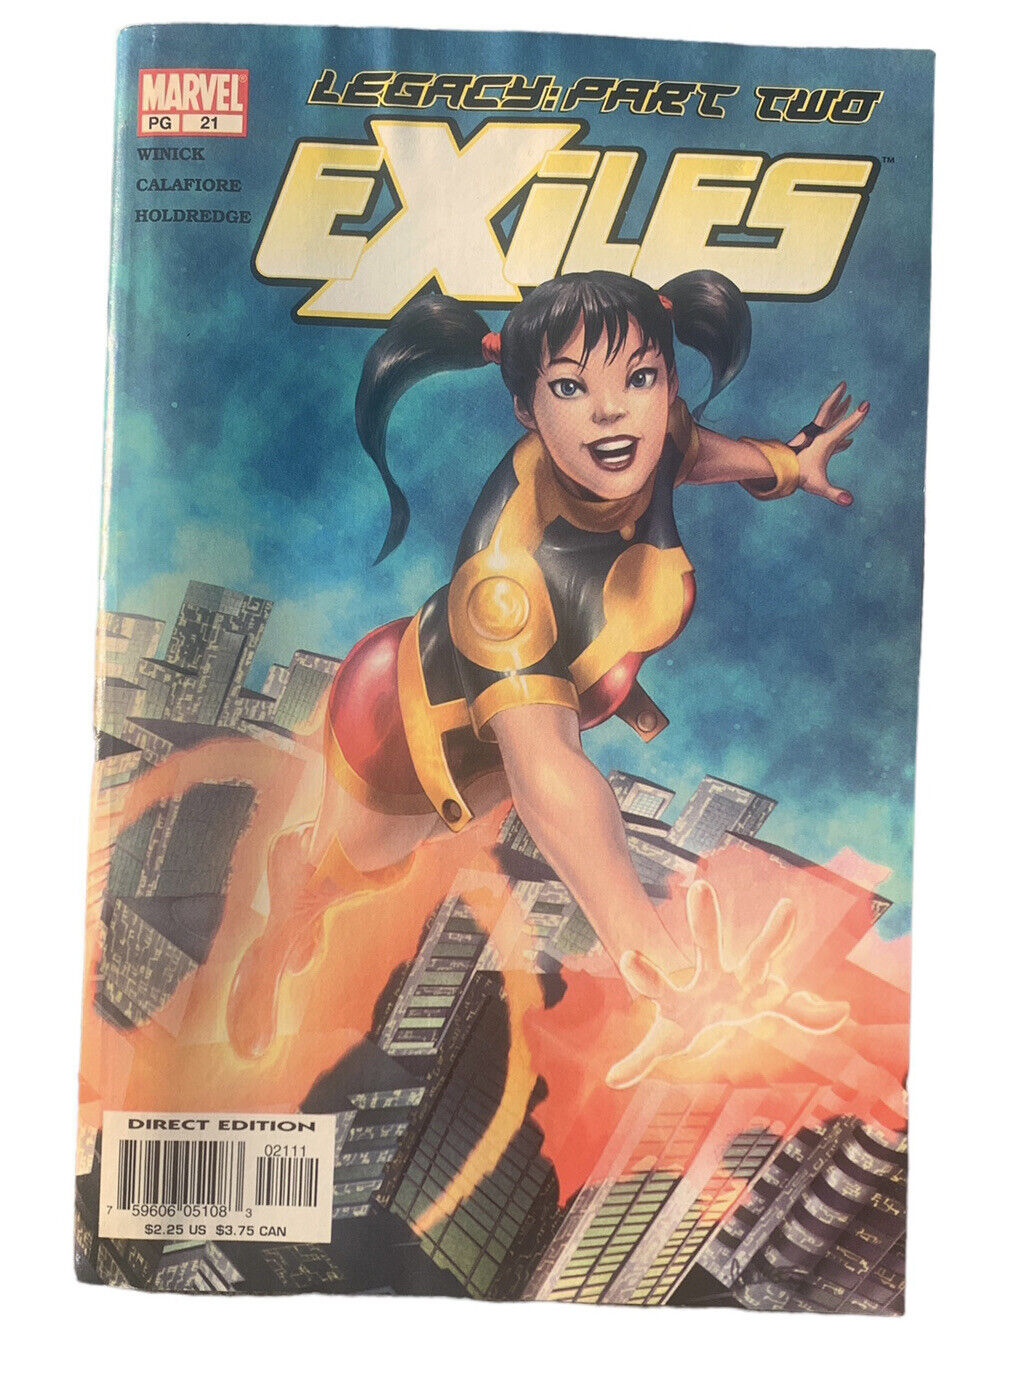 Exiles Legacy Part 2 #2 of 4 2003 Marvel Comics